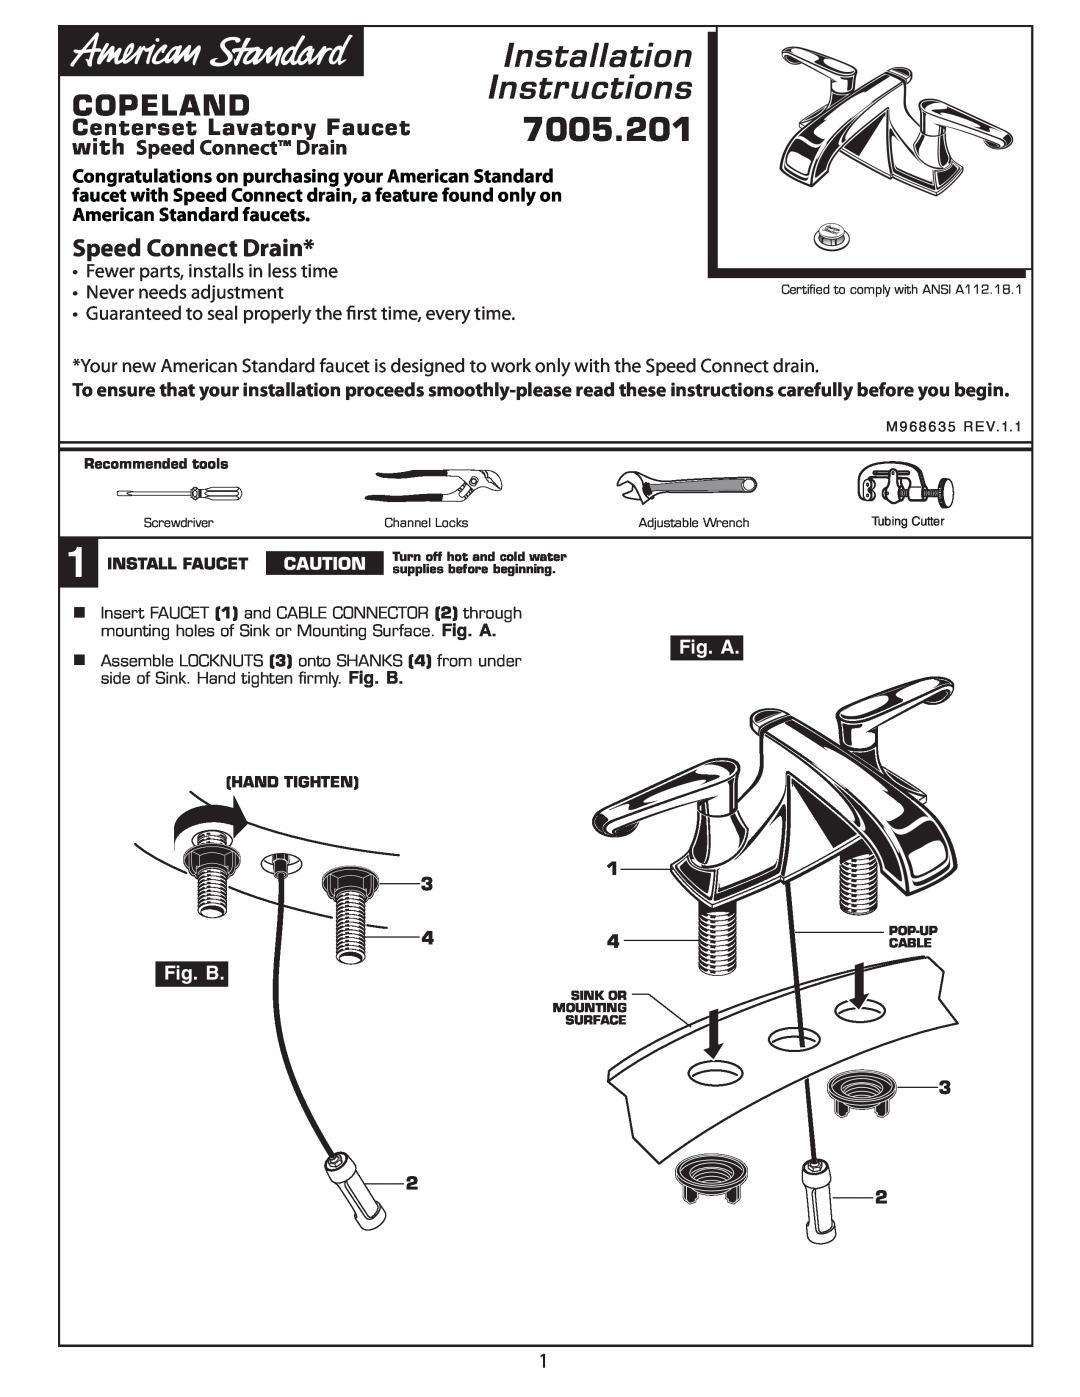 American Standard Centerset Lavatory Faucet installation instructions with Speed Connect Drain, Installation, 7005.201 